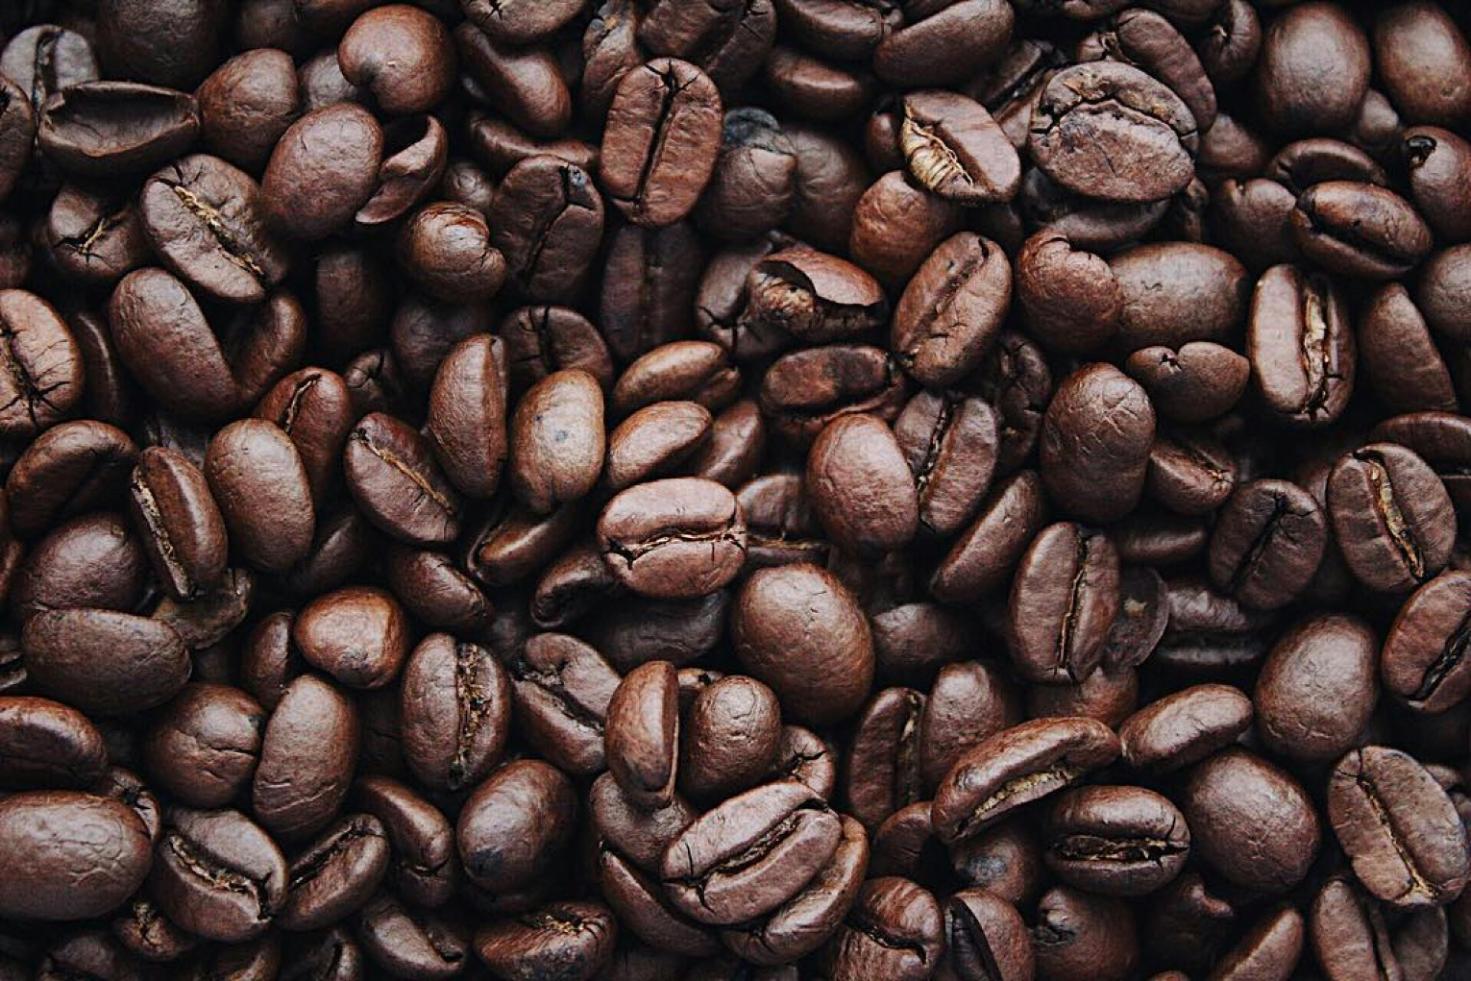 Is Coffee Good or Bad for Health